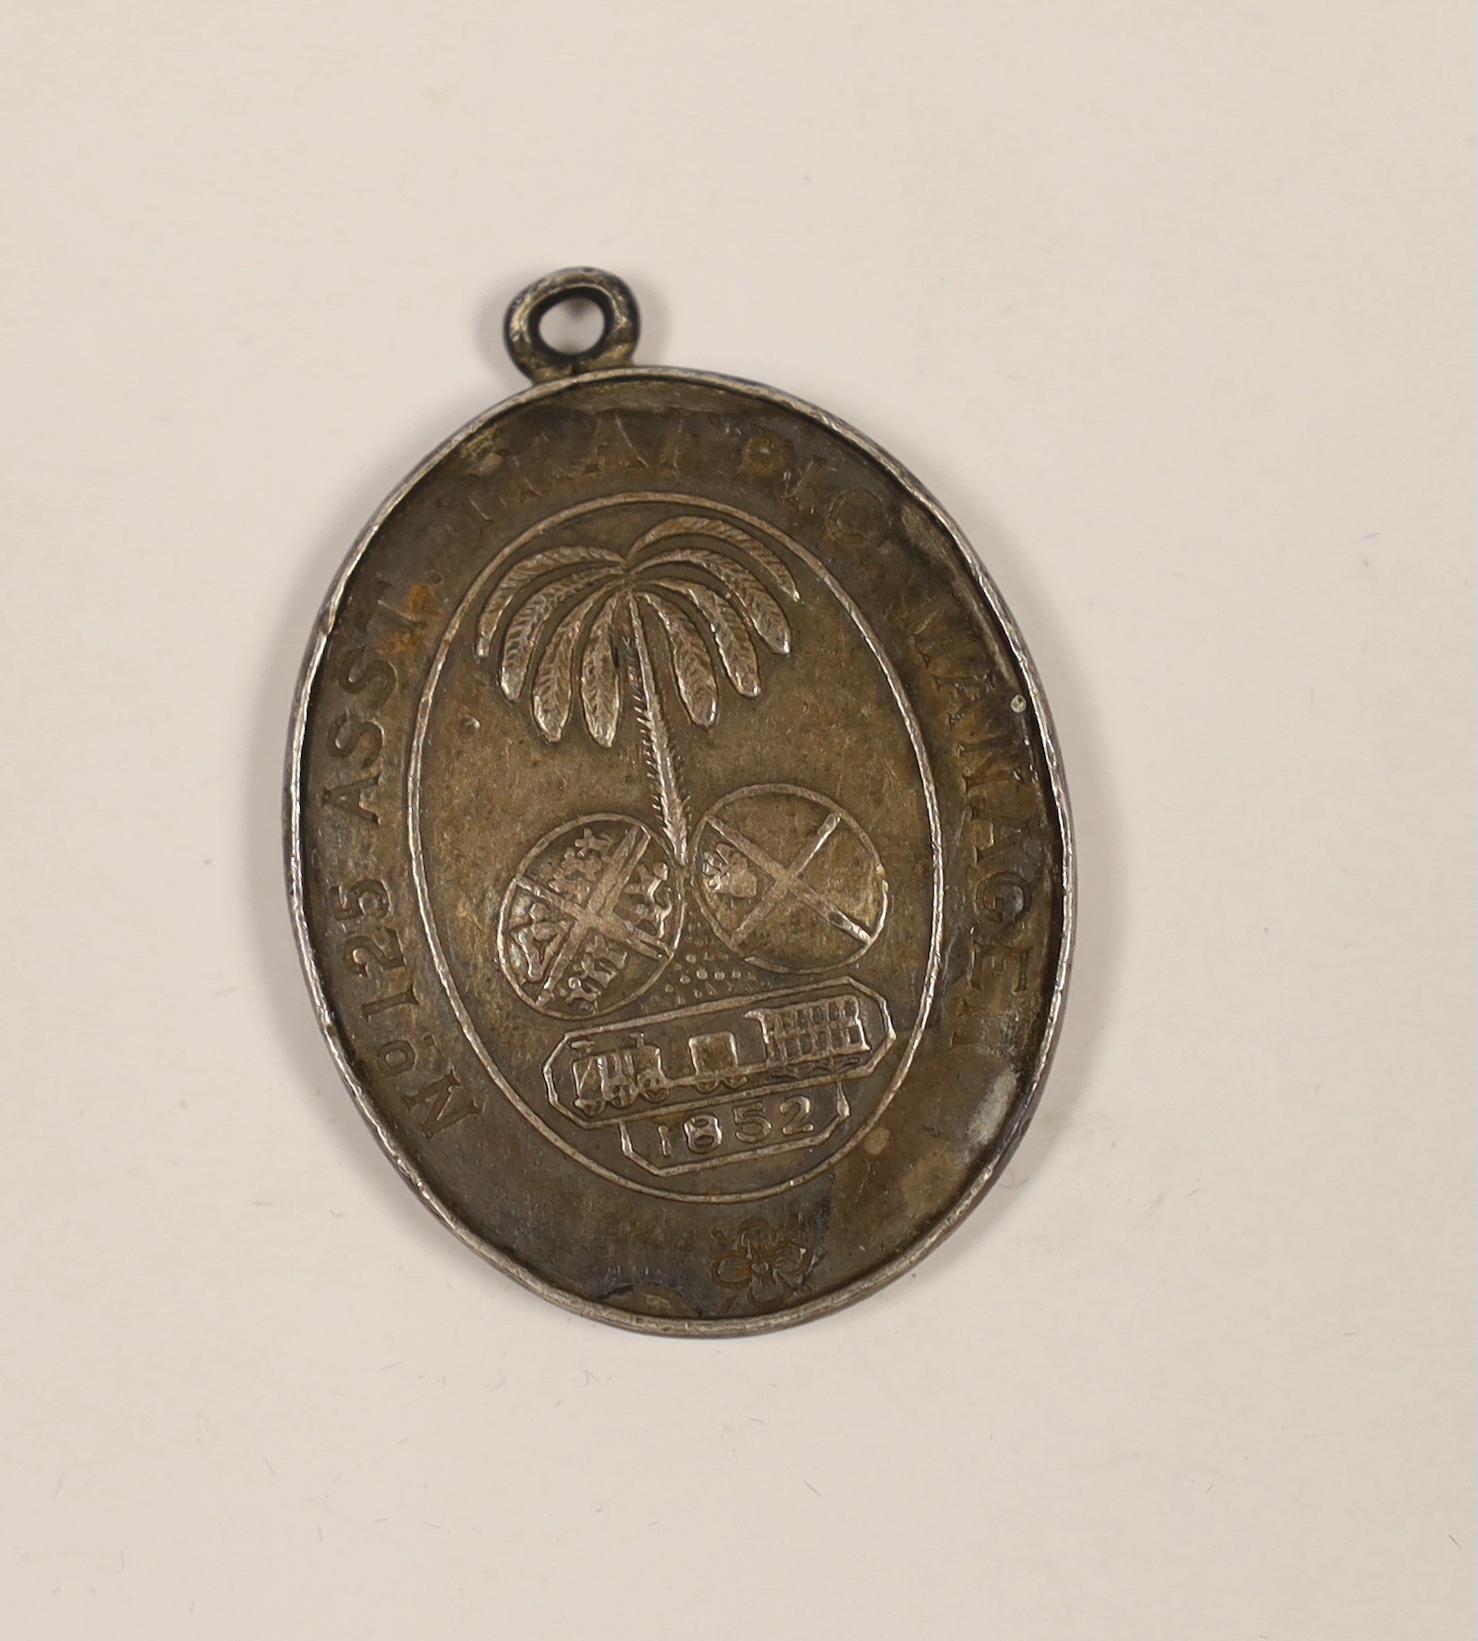 A scarce ‘Madras Railway Company free pass’ medallion, dated 1852, engraved ‘No125 ASST. TRAFFIC - Image 2 of 2